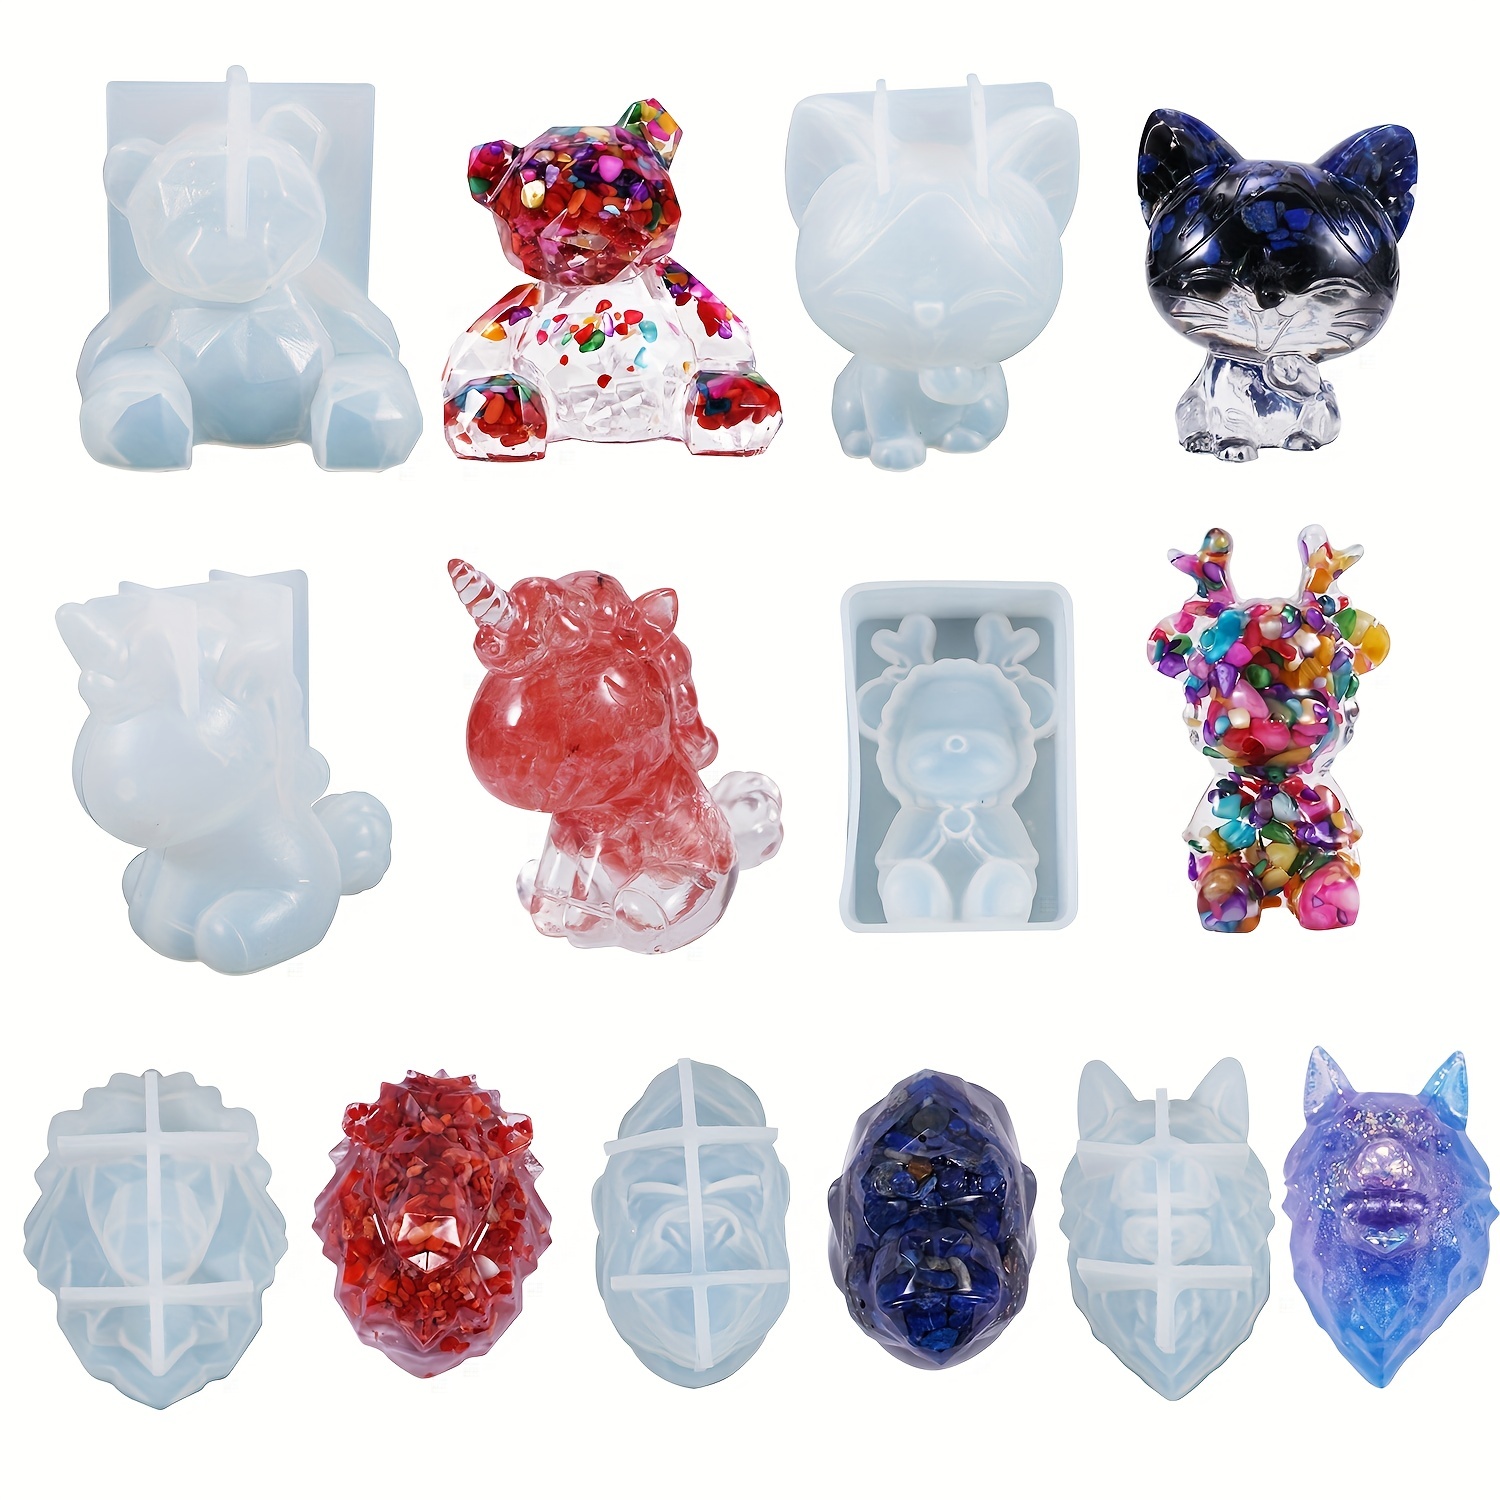 

7pcs/set 3d Animal Resin Molds, Epoxy Resin Silicone Molds, Large Clear Unicorn/bear/cat/lion/wolf/orangutan/deer Epoxy Silicone Molds For Diy Resin Craft Home Decor